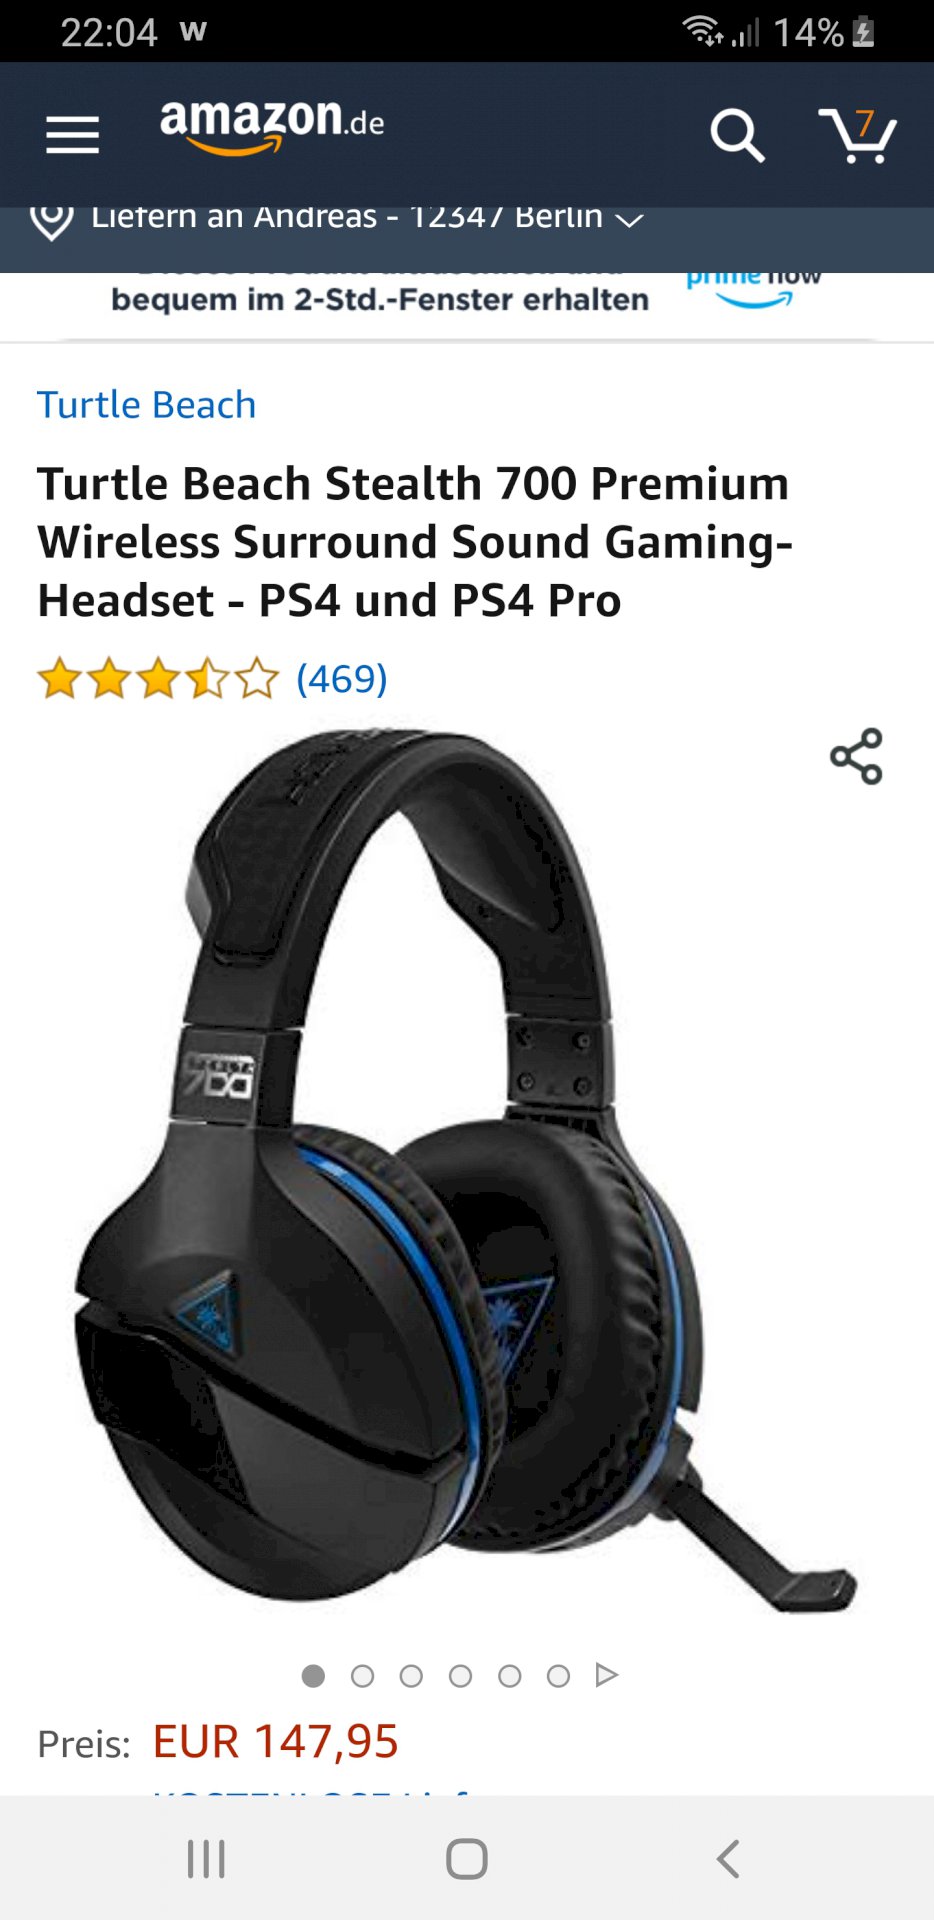 Ps4 Gaming Headset Turtle Beach, Steelseries or Logitech